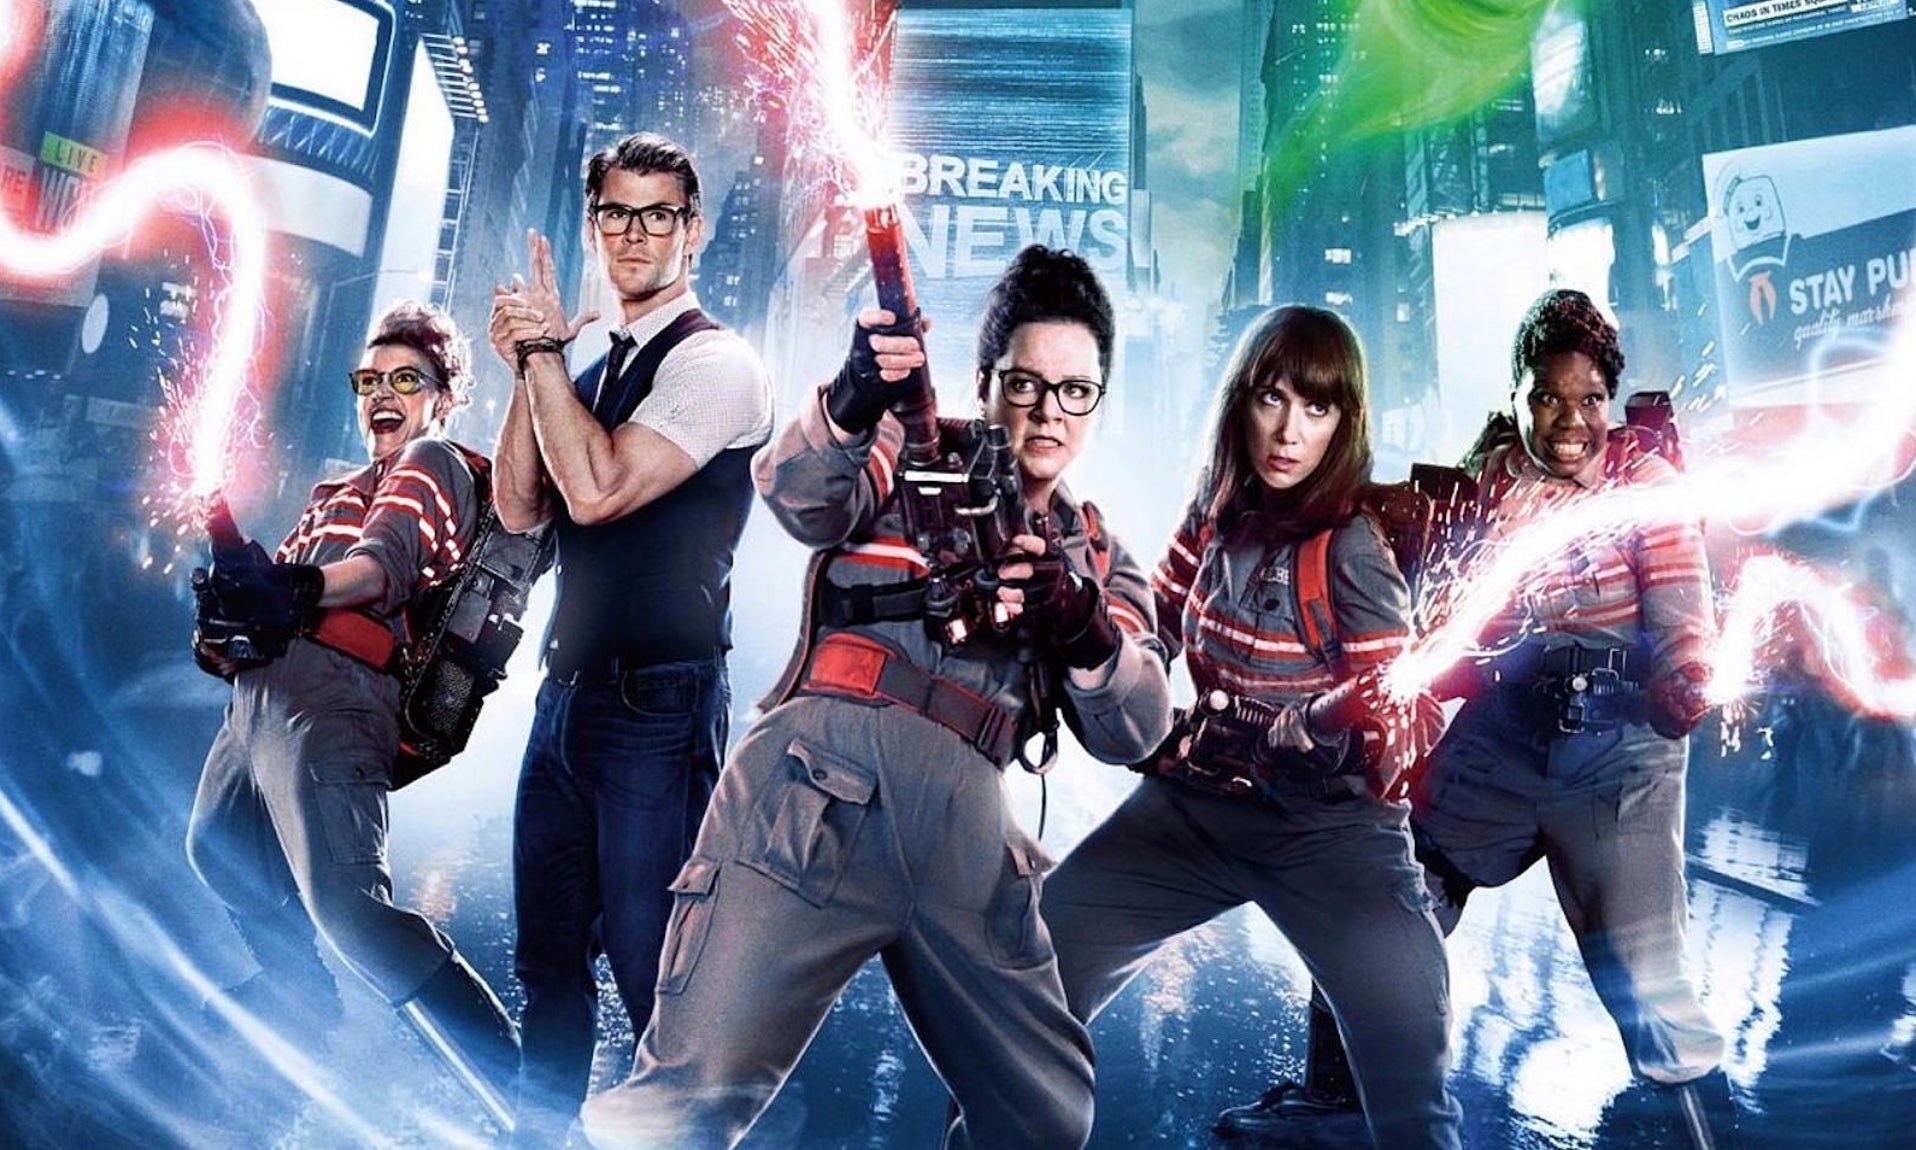 Ghostbusters: Answer the Call (Image: Sony)